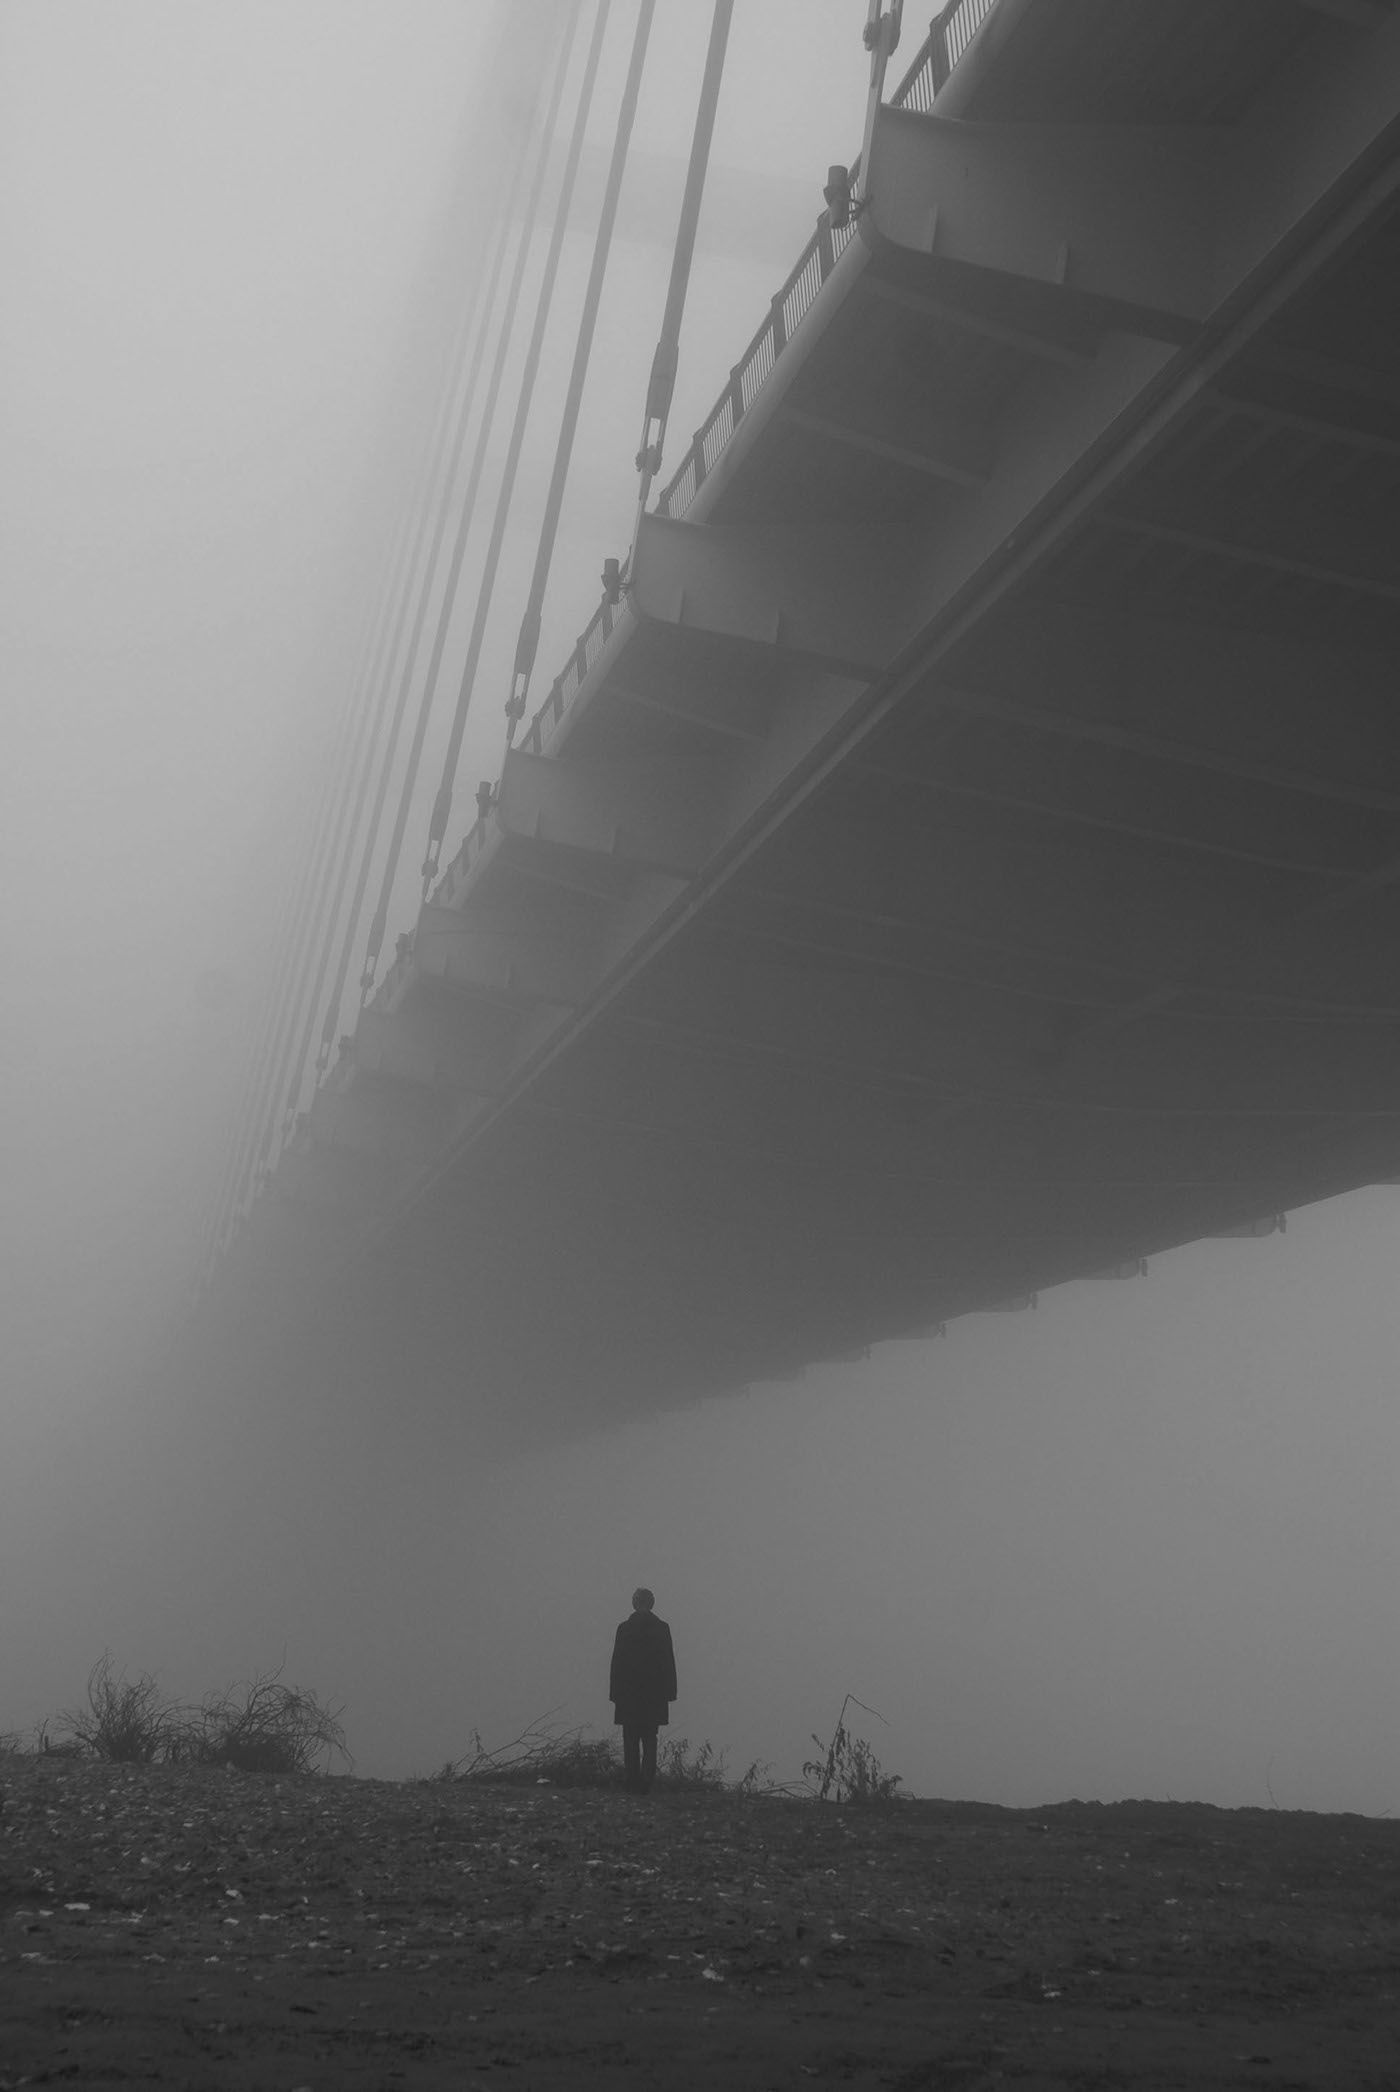 A man in a suit stands under a bridge in the fog. - Fog